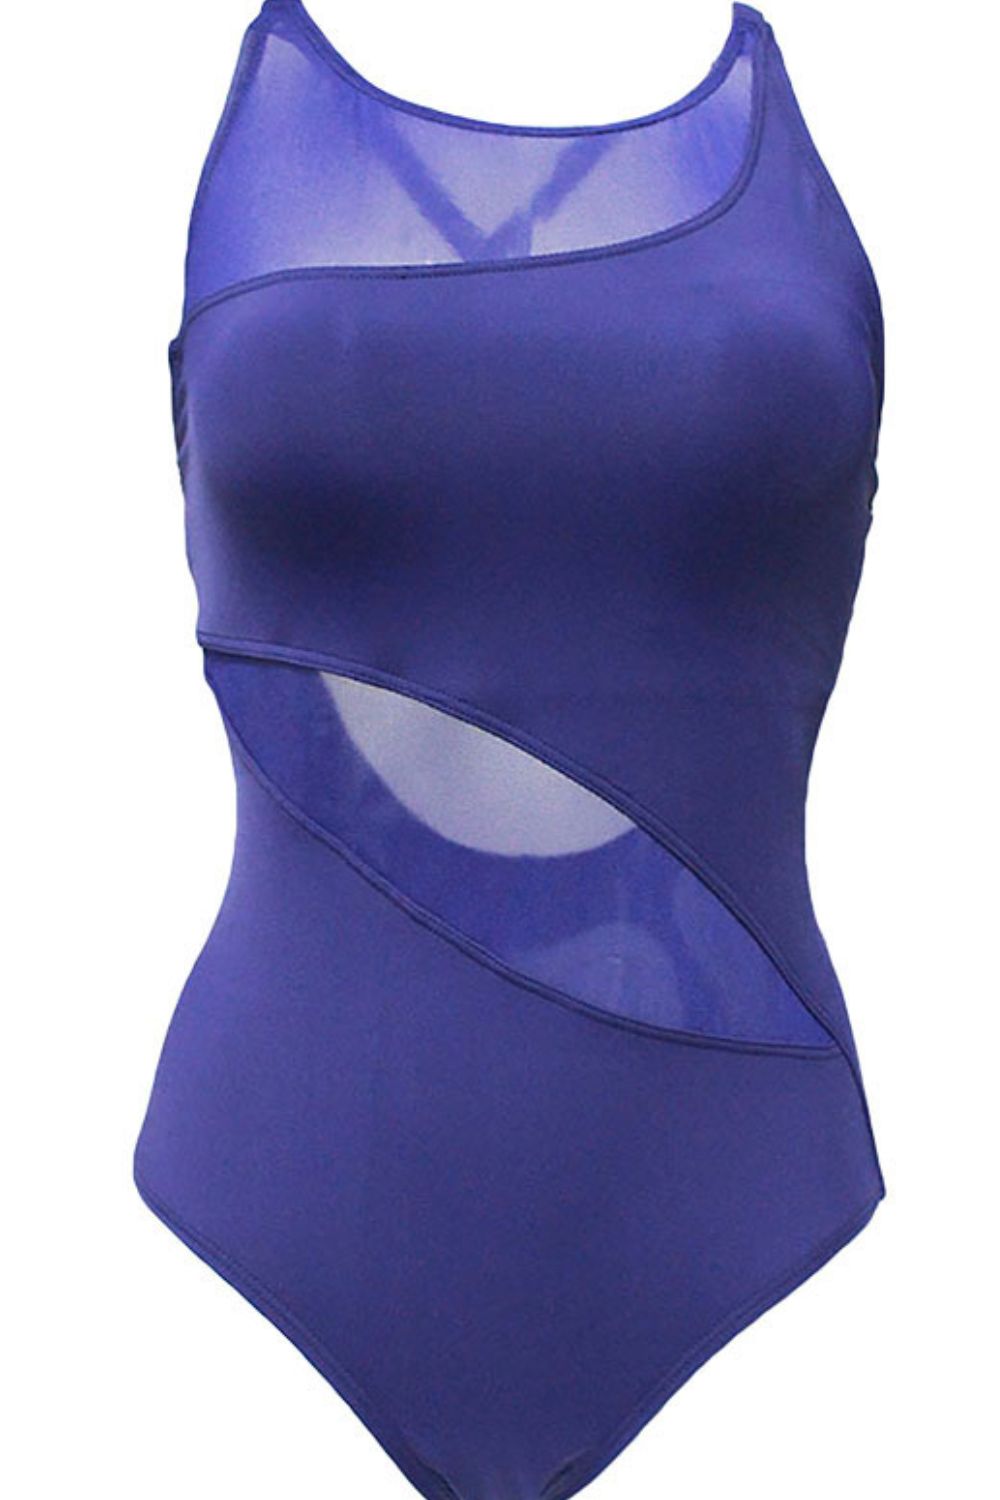 Spliced Mesh Scoop Neck Sleeveless One-Piece Swimsuit  Sunset and Swim Violet S 